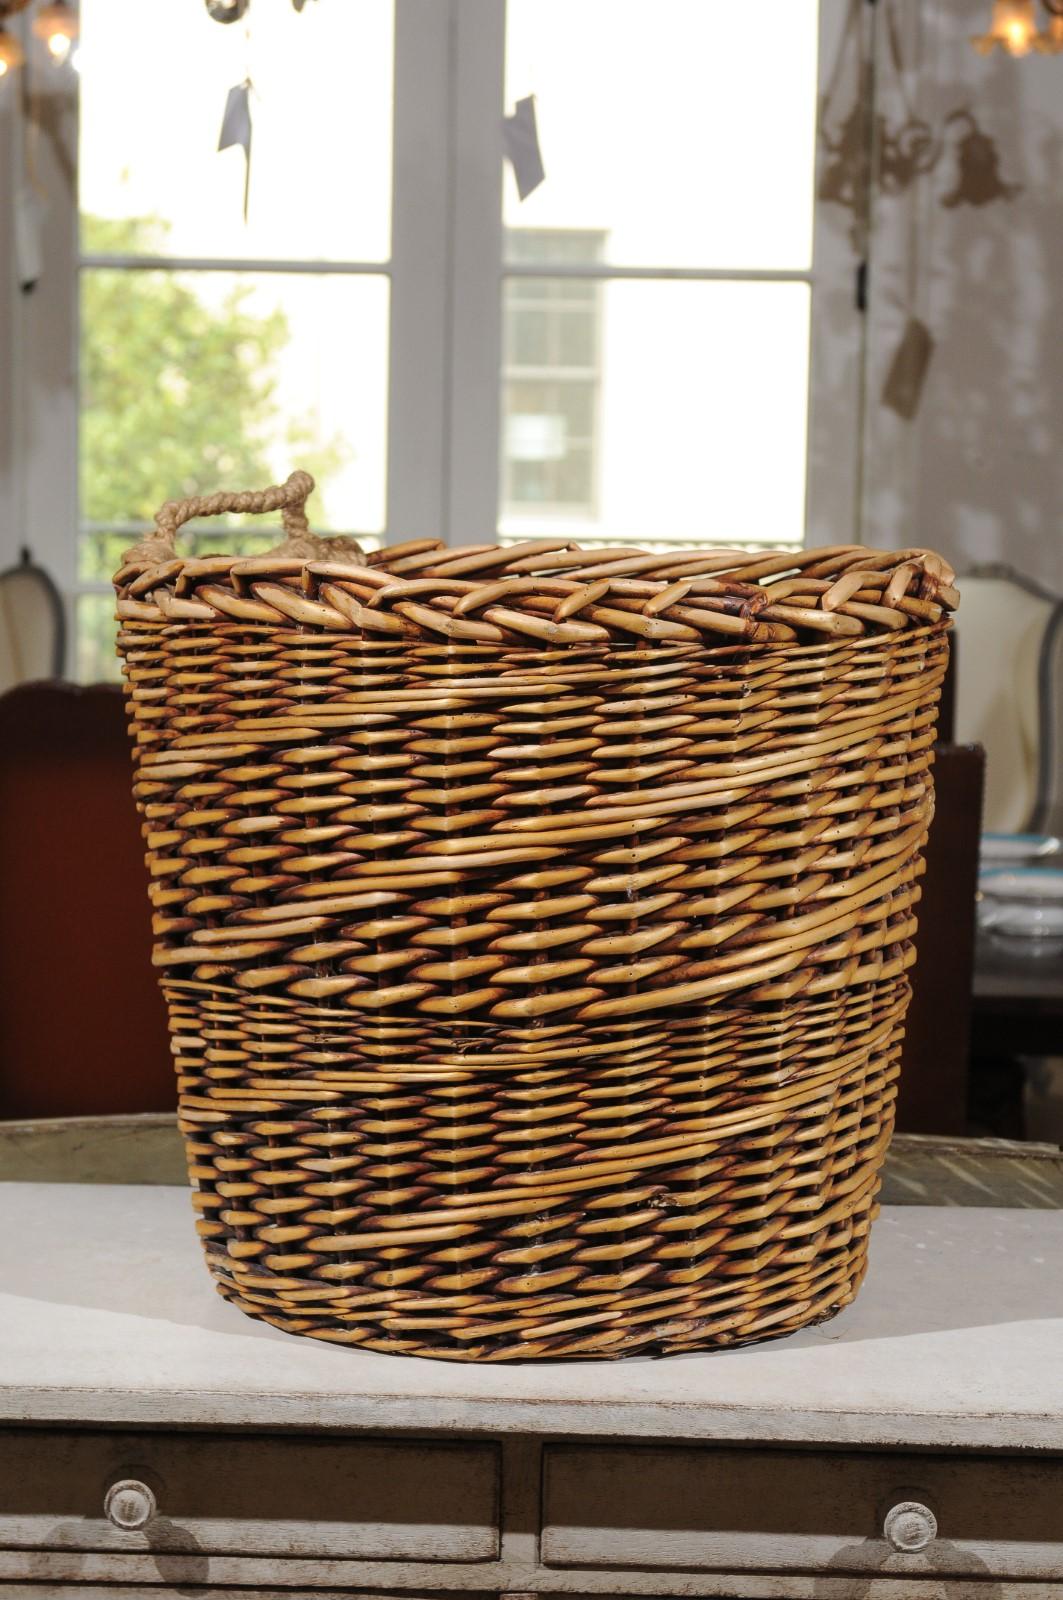 Rustic French Wicker Basket with Single Lateral Handle and Diagonal Patterns 6